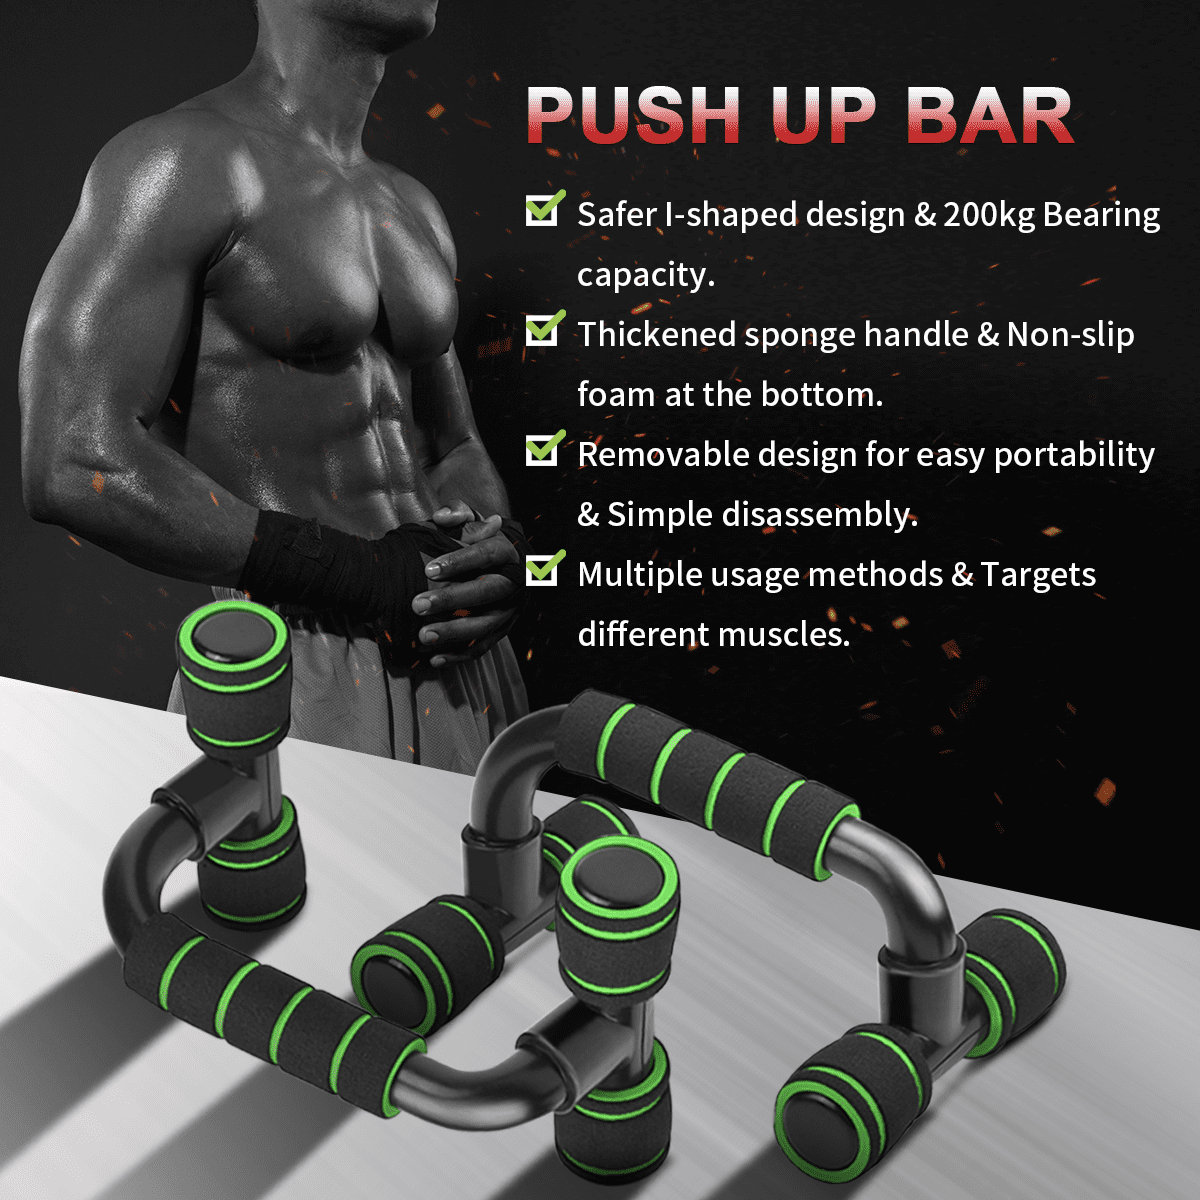 Workout for Home Gym & Traveling Fitness Great for Your Muscle Ups Pull Ups & Strength Training Perfect Fitness Equipment EAHKGmh Push Up Bars